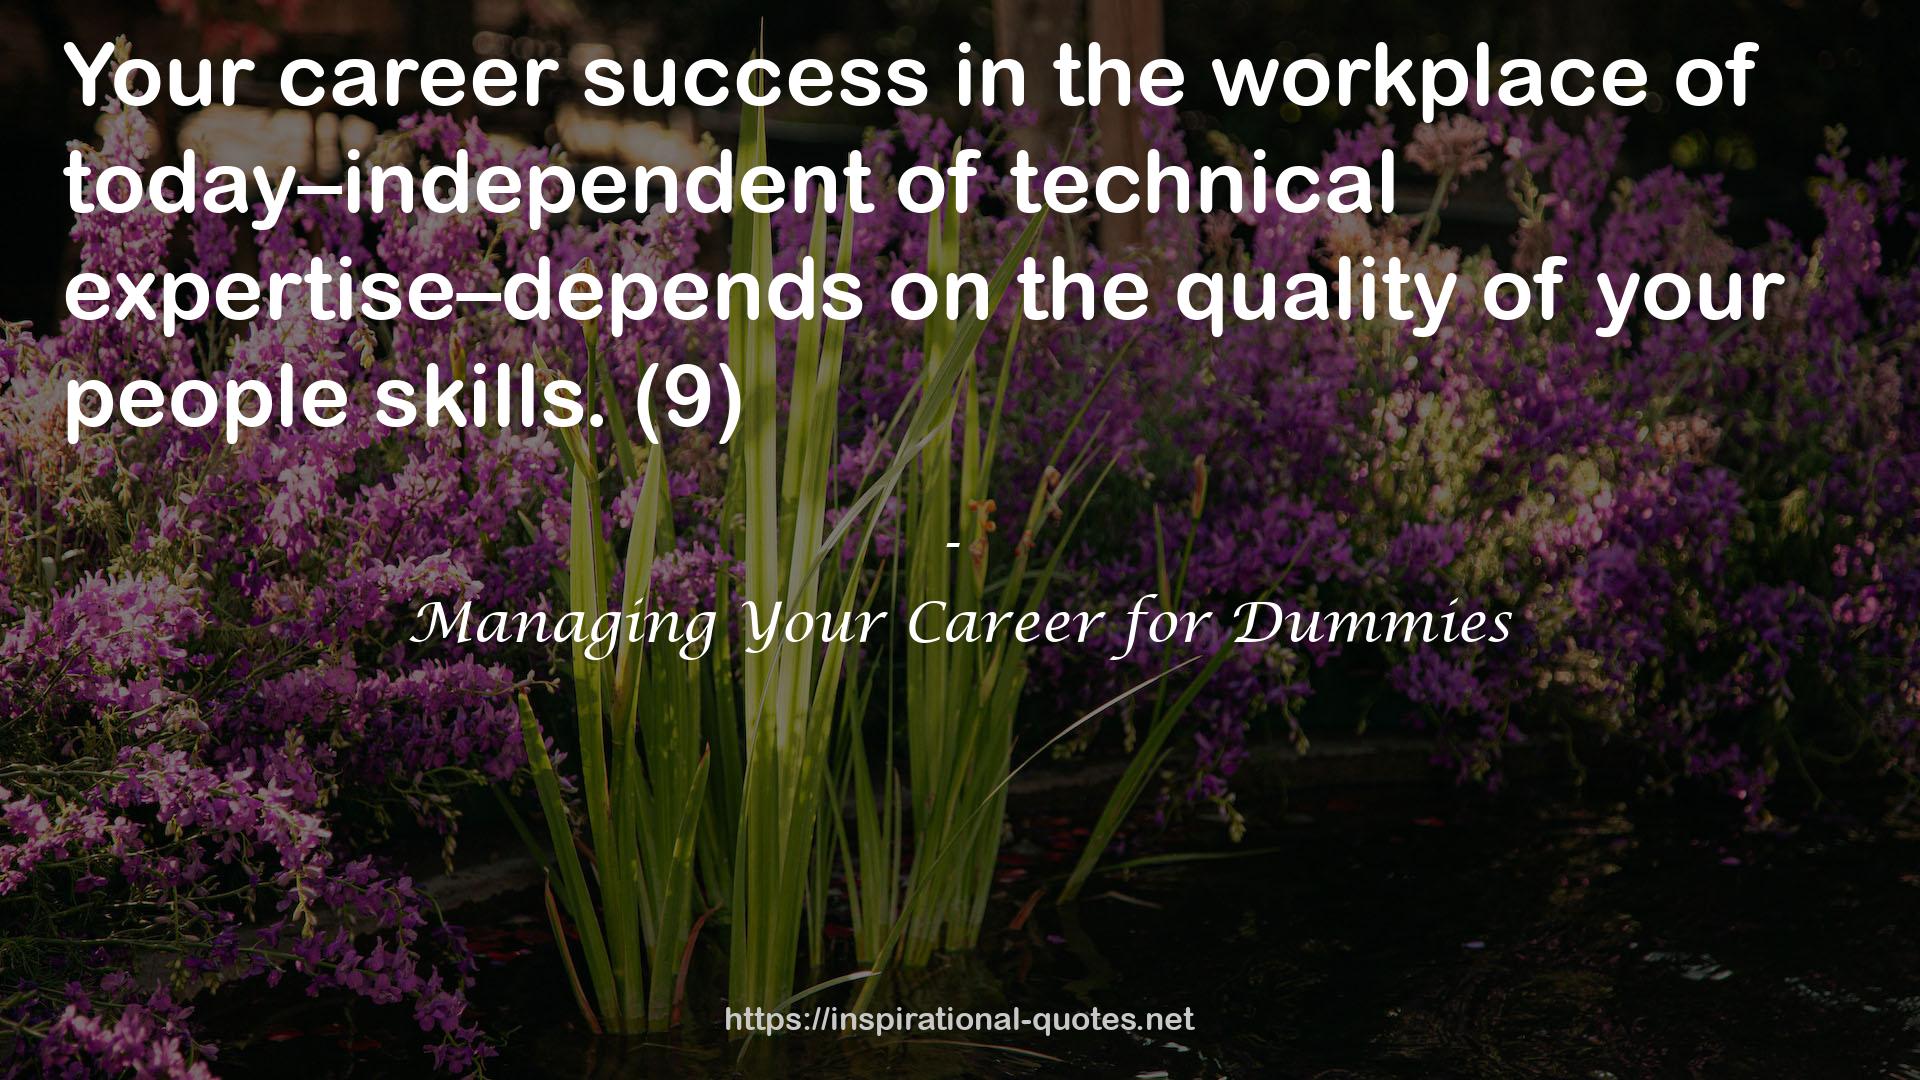 Managing Your Career for Dummies QUOTES